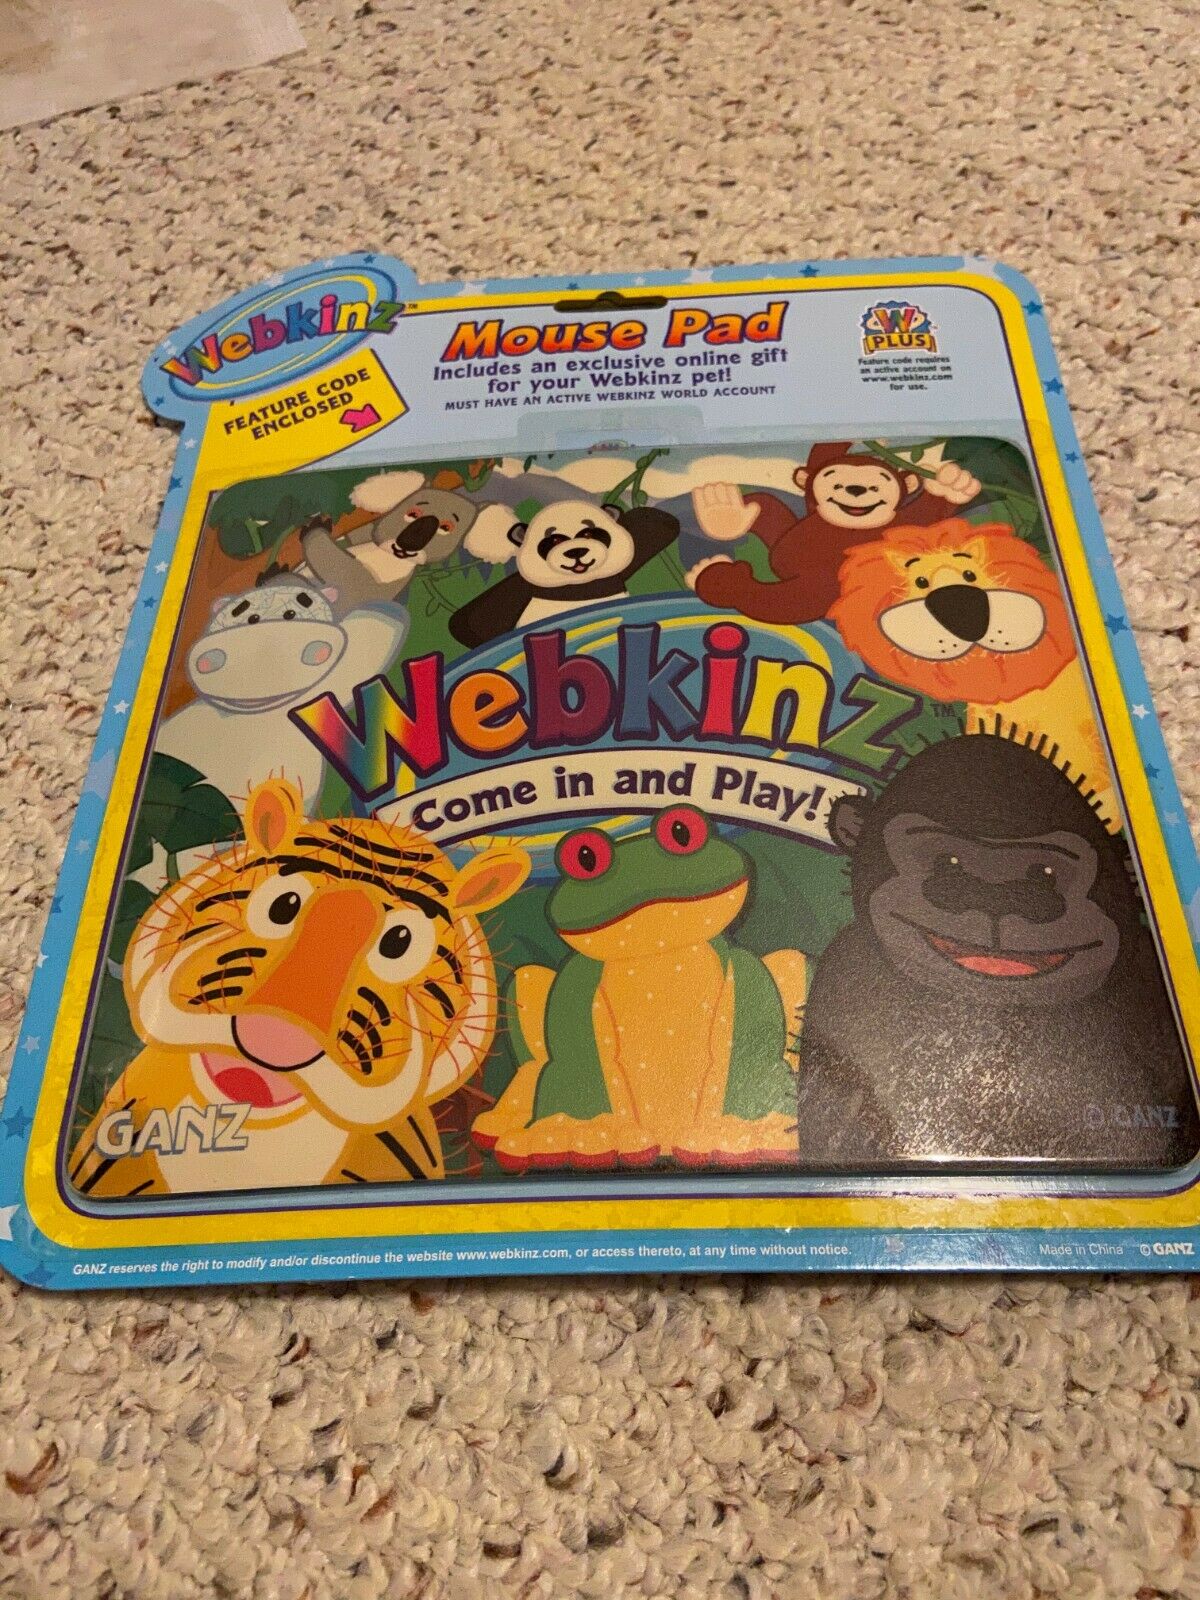 Nwt Webkinz Mouse Pad With Code Features Gorilla, Tiger, Hippo: Sealed With Code